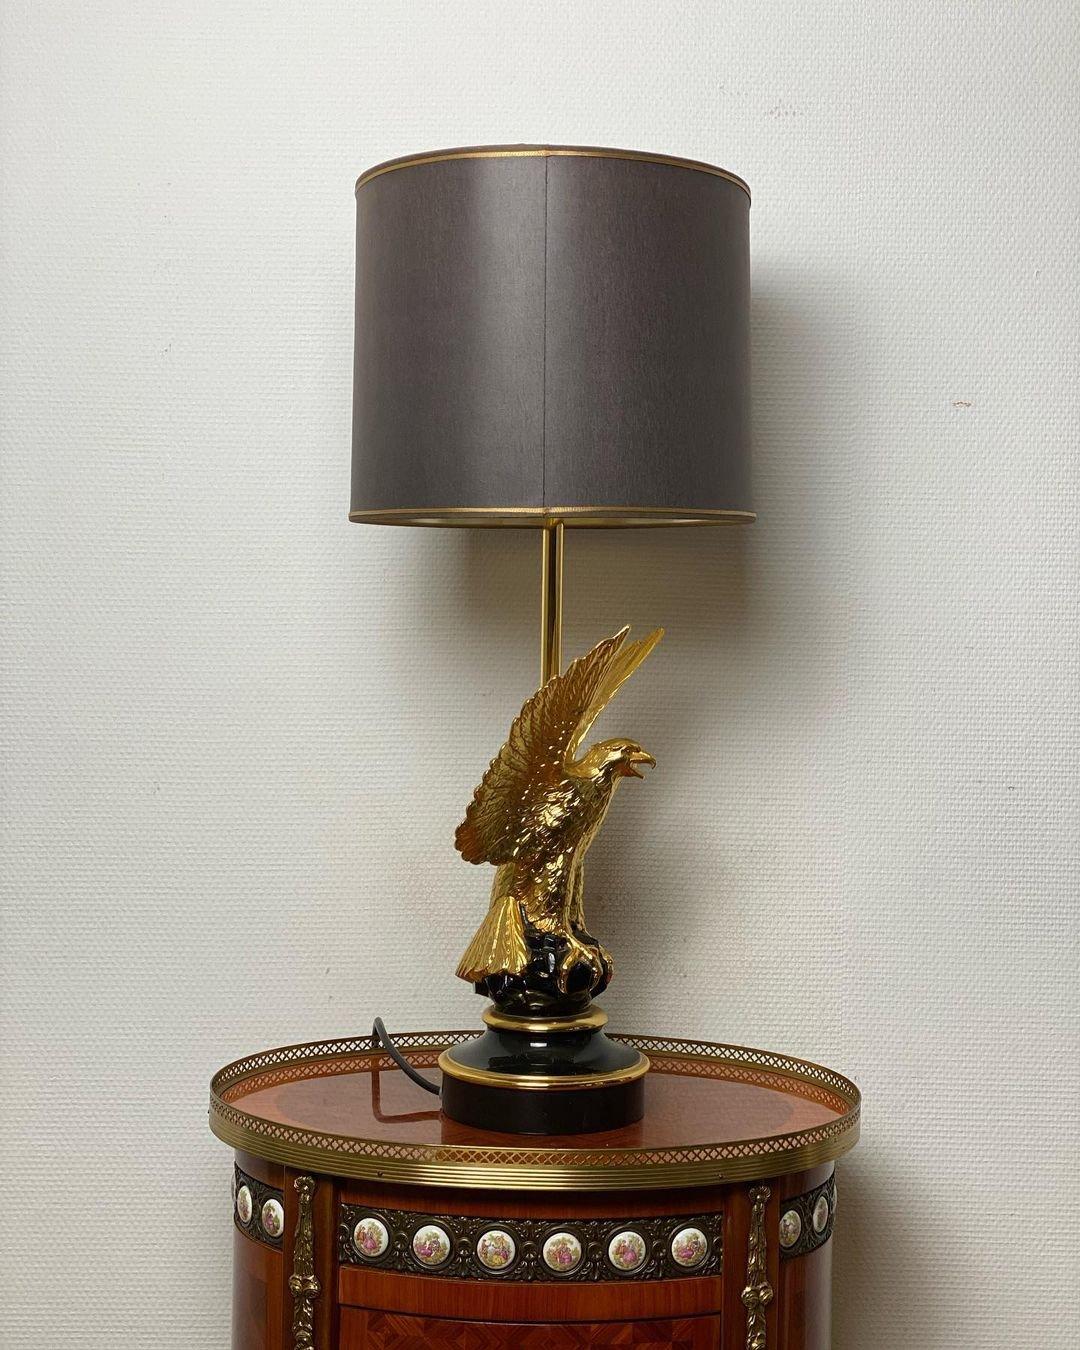 - Gorgeous table lamp from the famous American company Loevsky & Loevsky, New Jersey, USA
- Model 